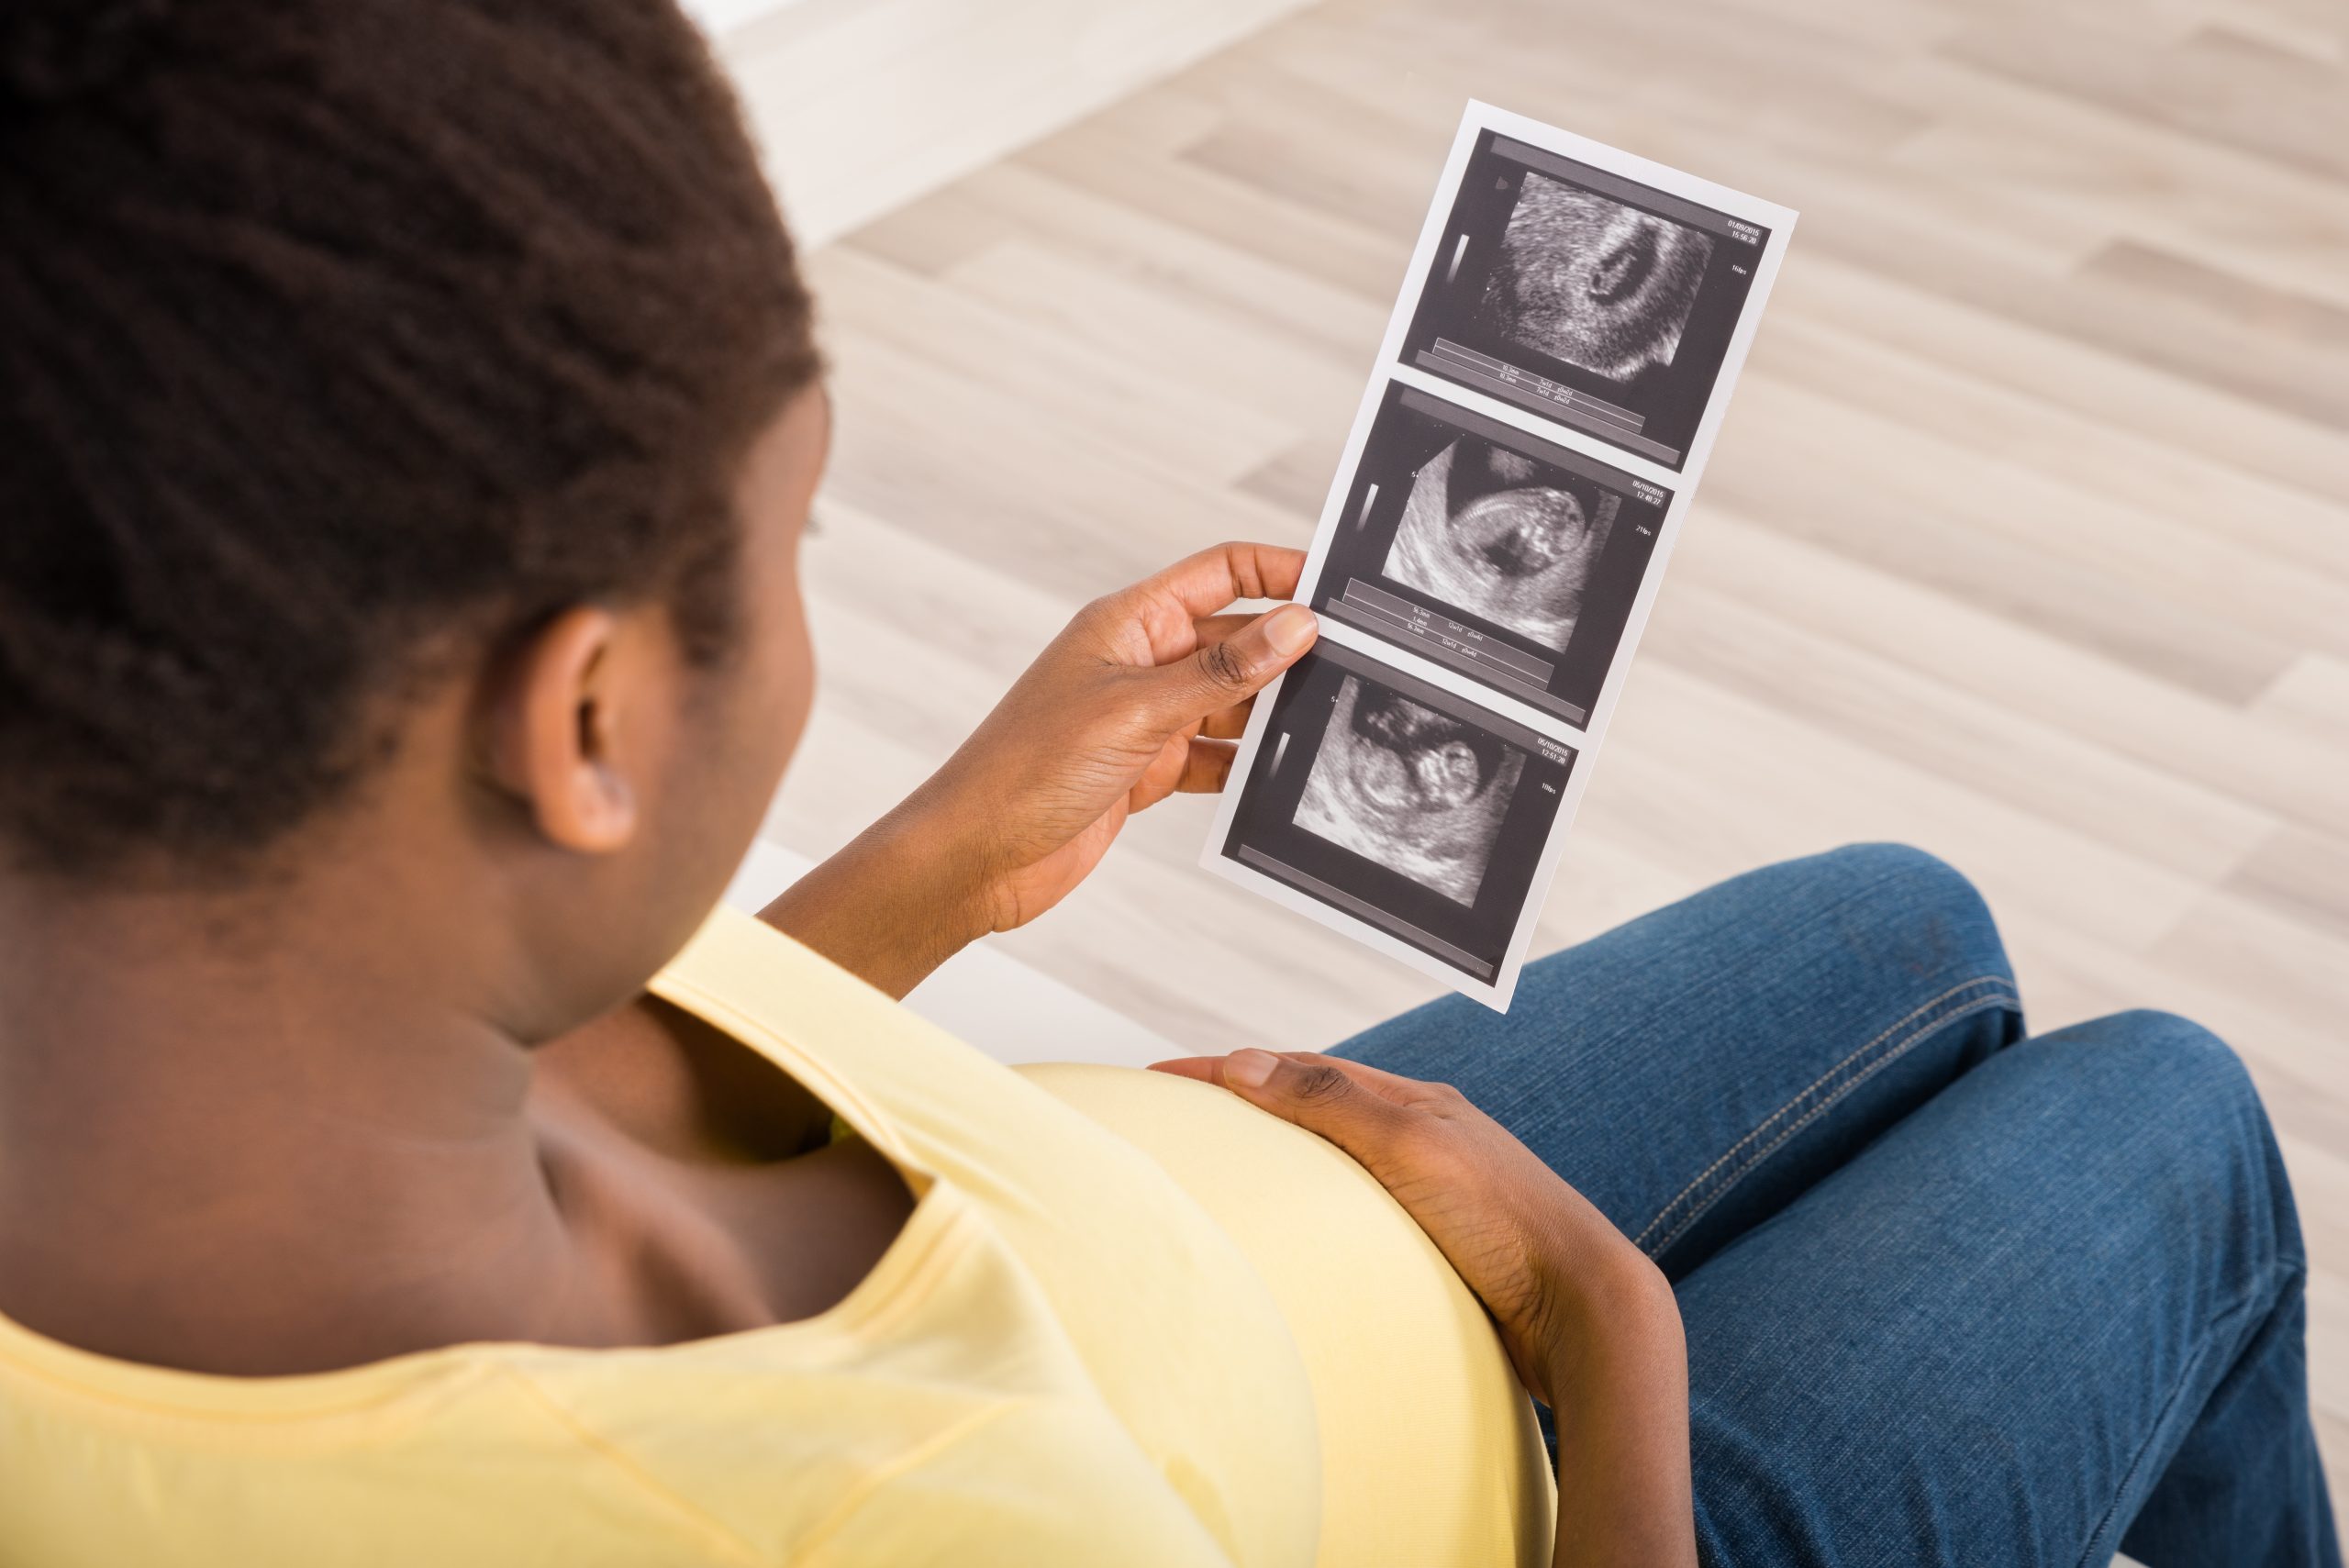 A pregnant woman wearing a yellow top looks at ultrasound scans of the baby